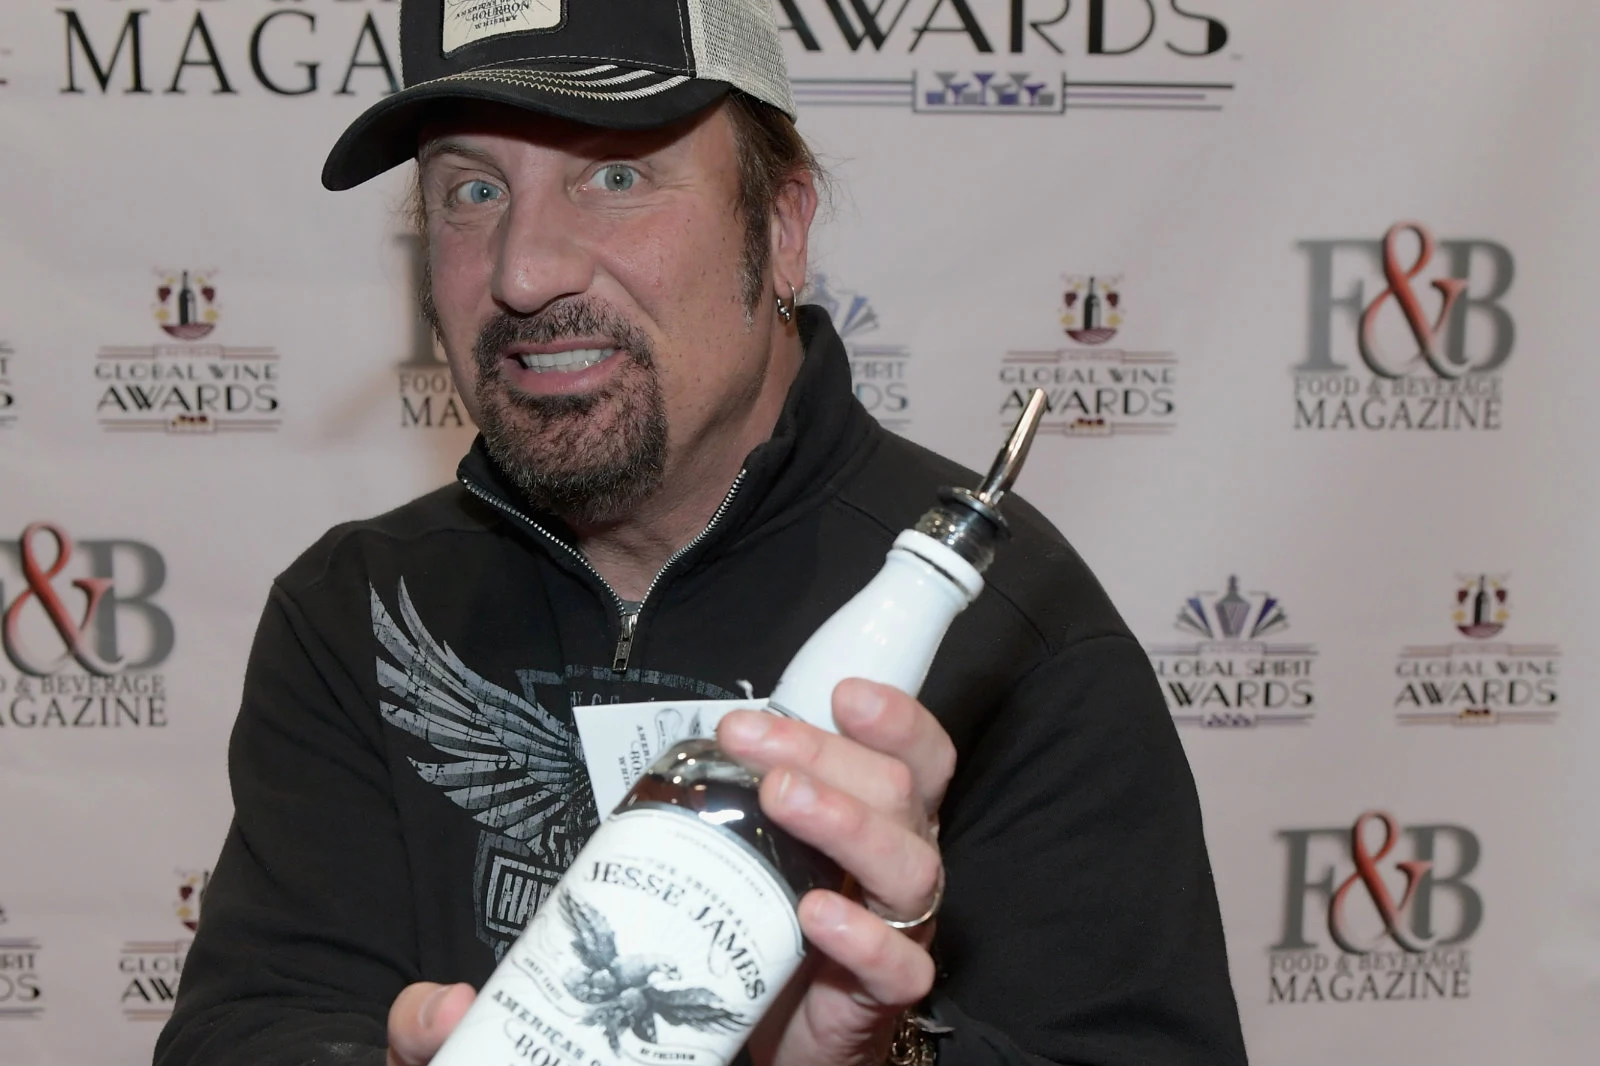 Jesse James Dupree, lead singer of Jackyl, will appear in York to sign  bottles from his line of whiskey products